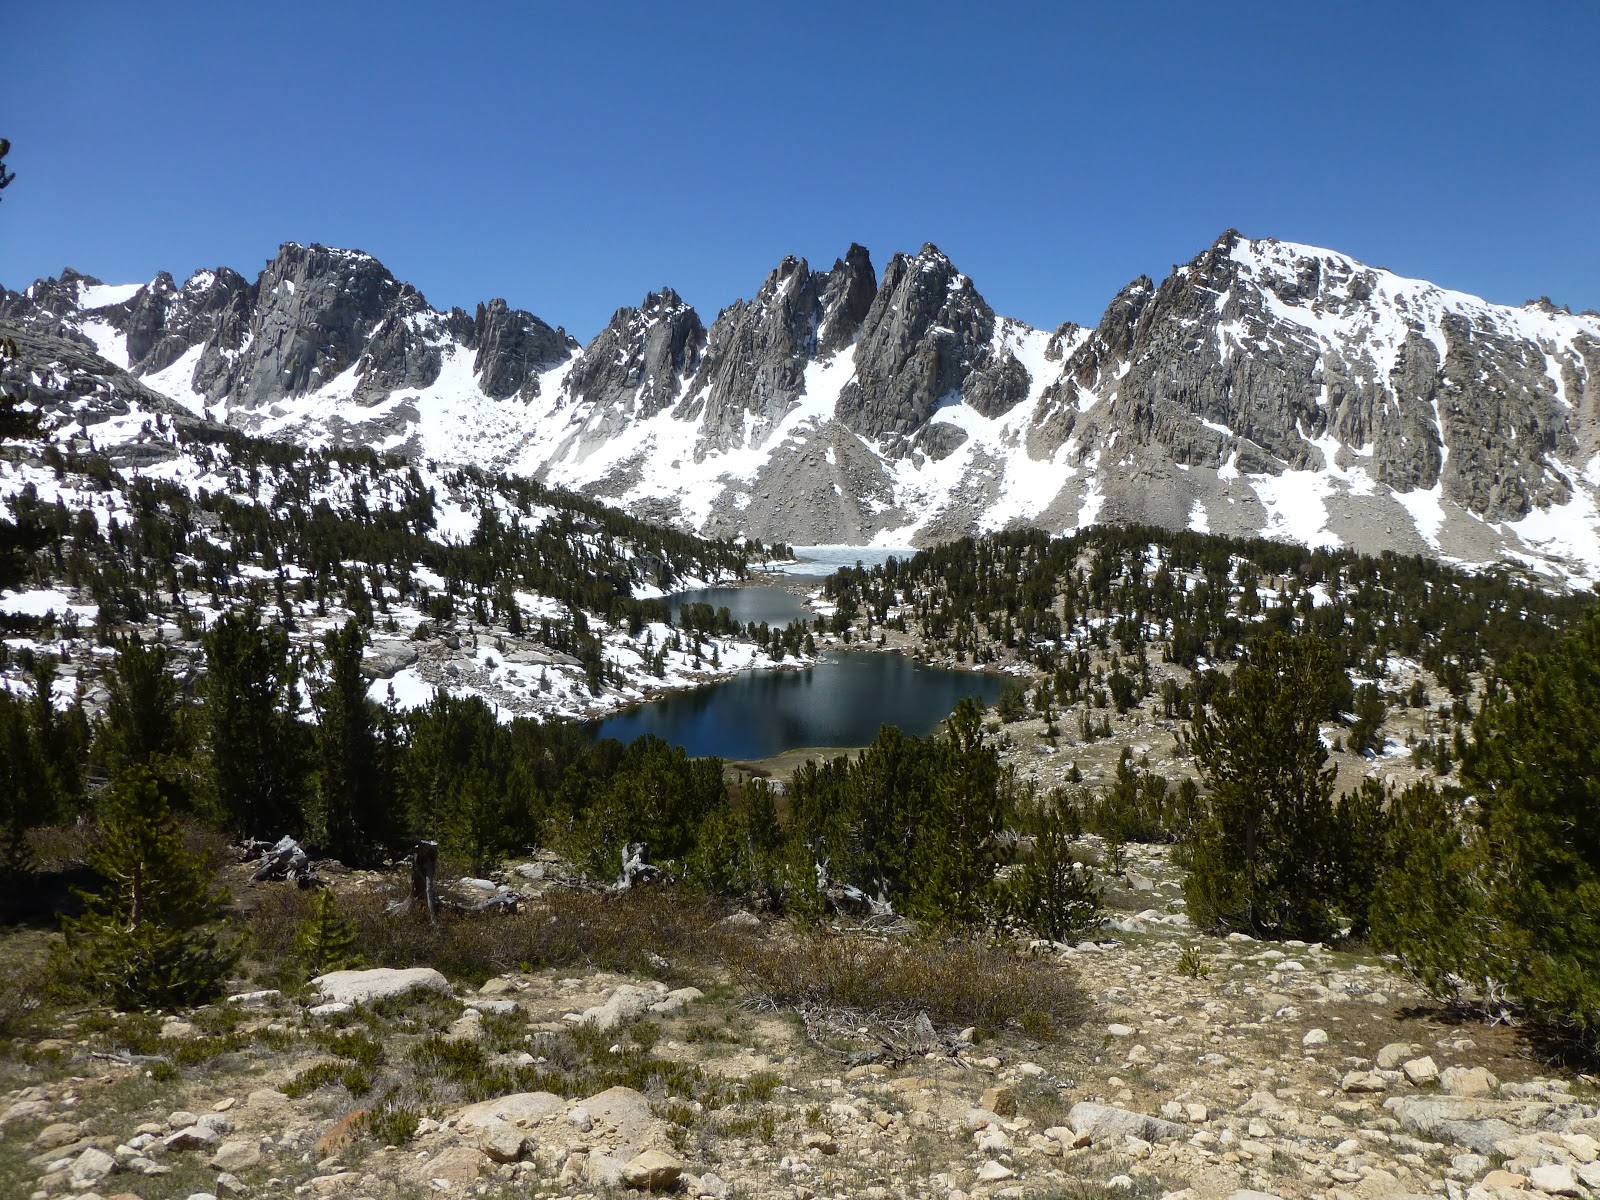 View towards Kearsarge Pinnacles, from the way up to the pass